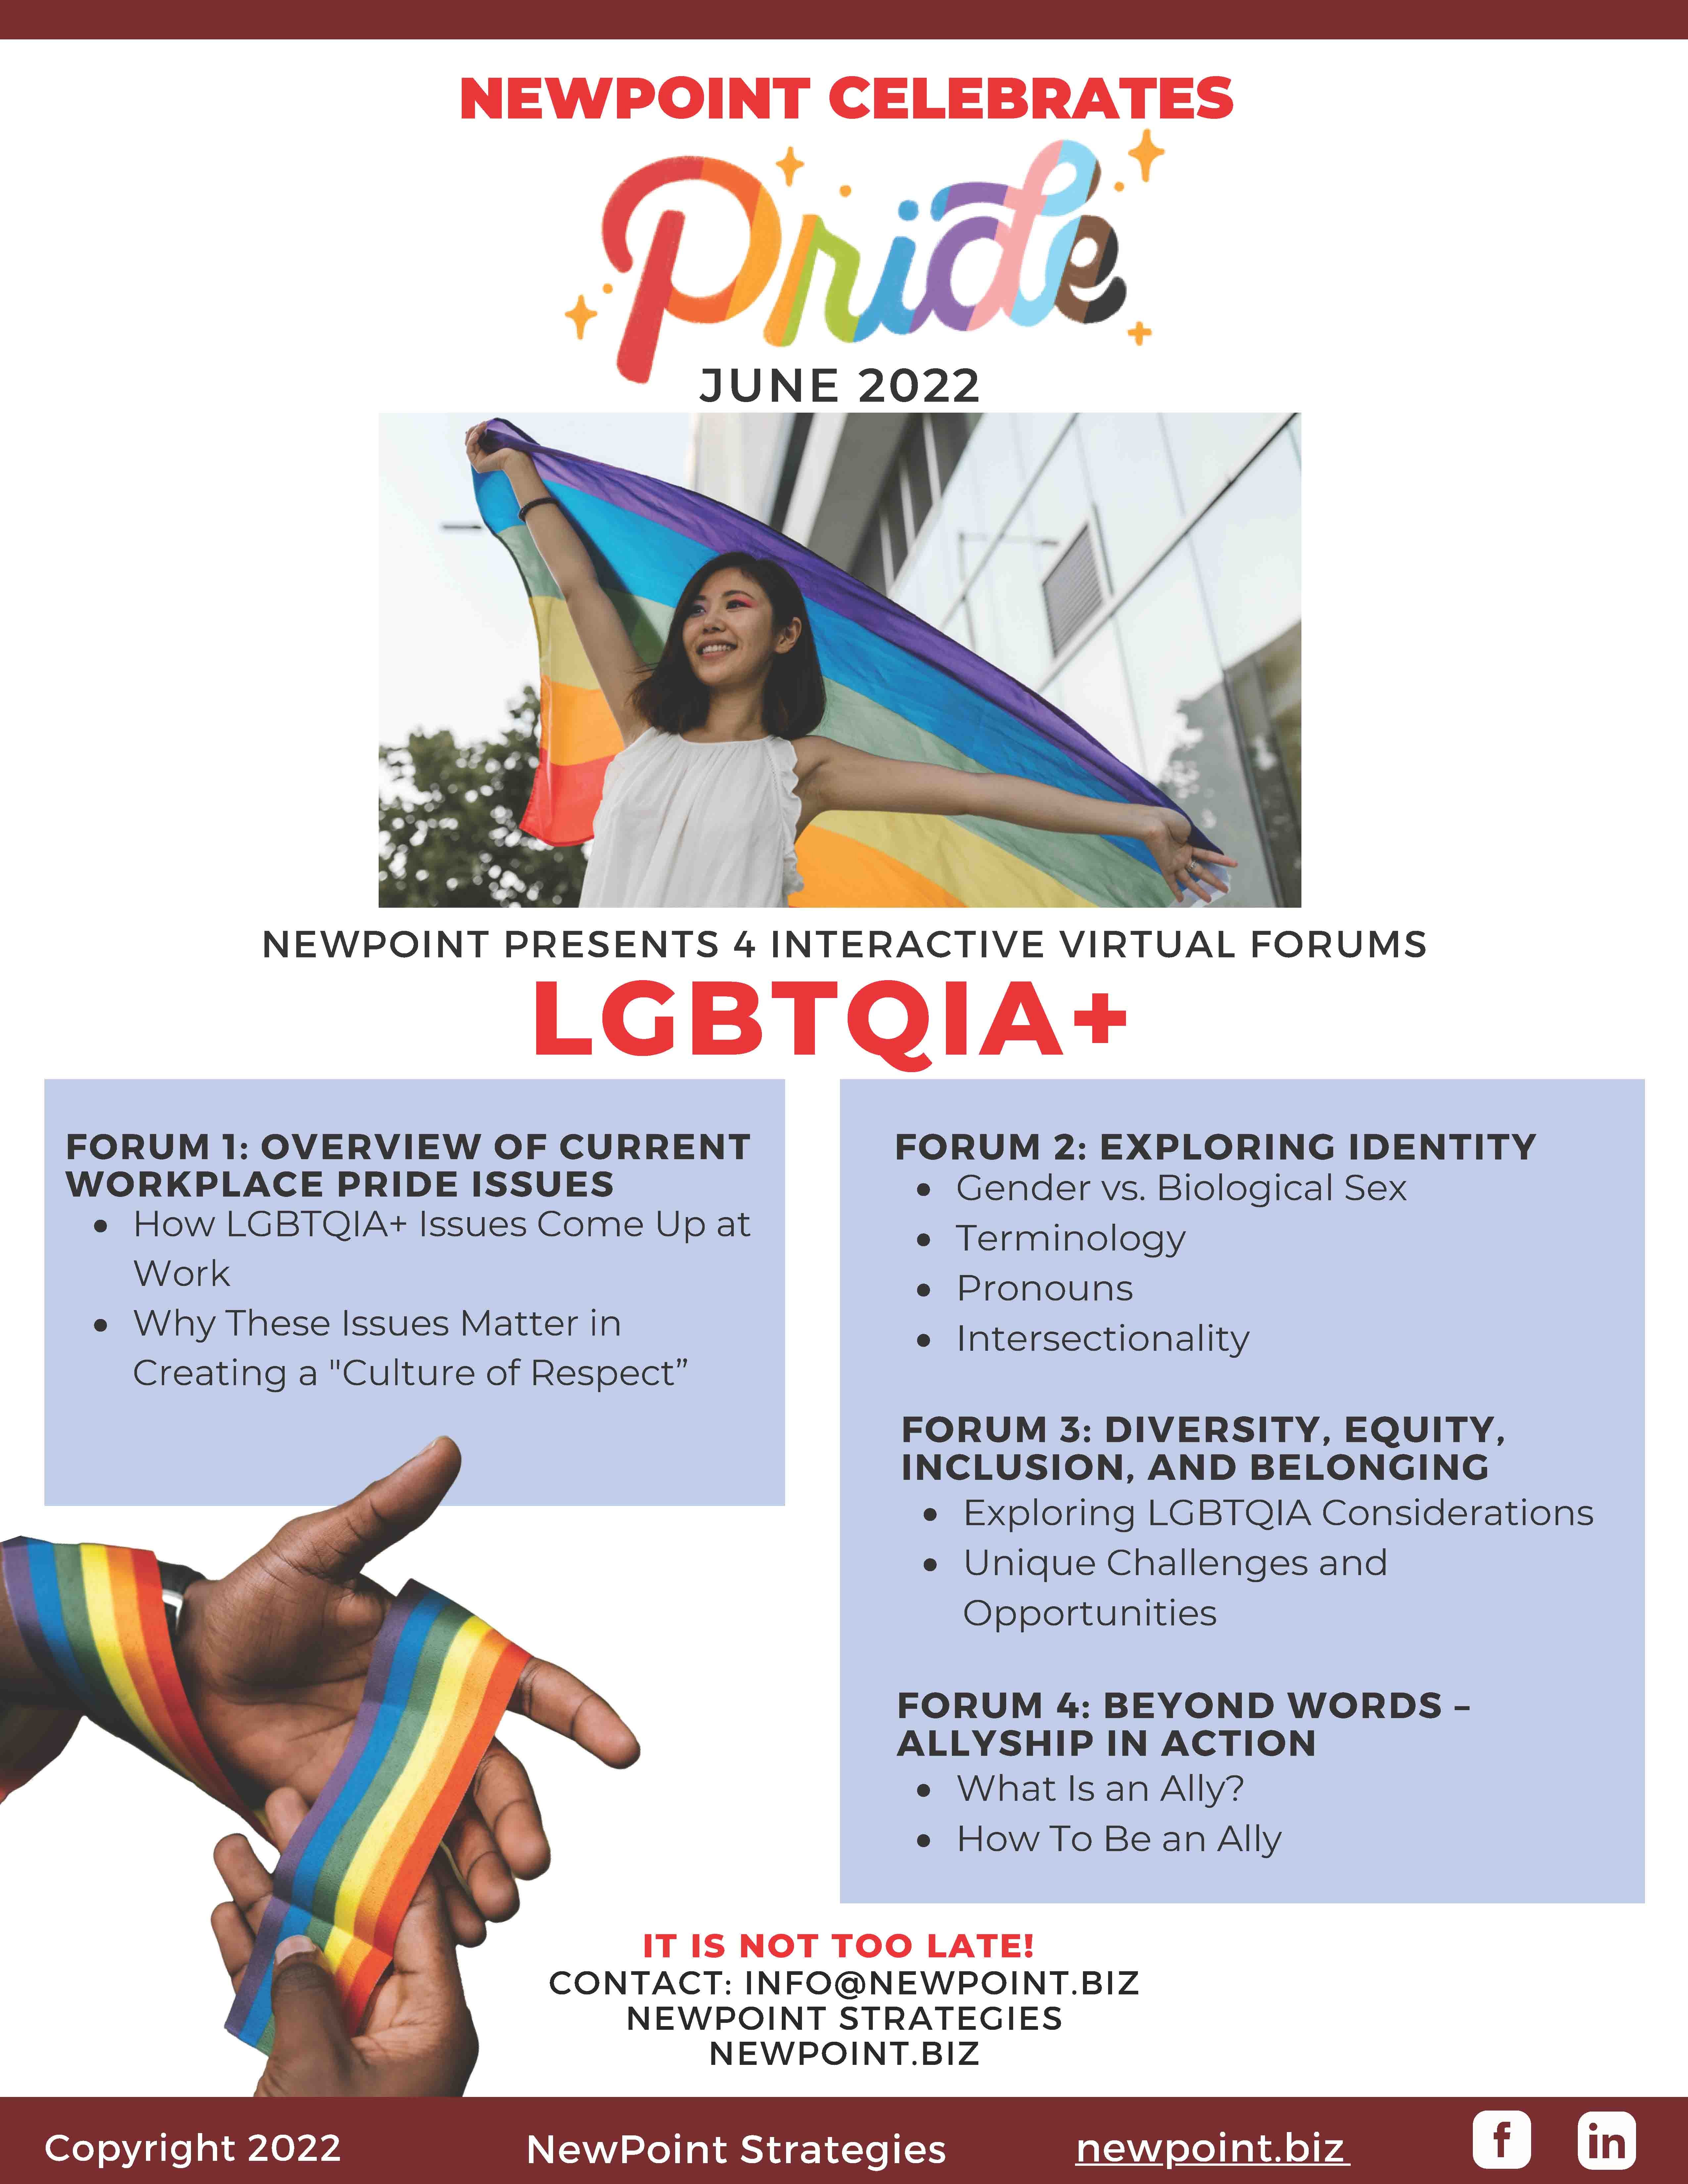 Virtual Forums on LGBTQIA+ Issues in the Workplace